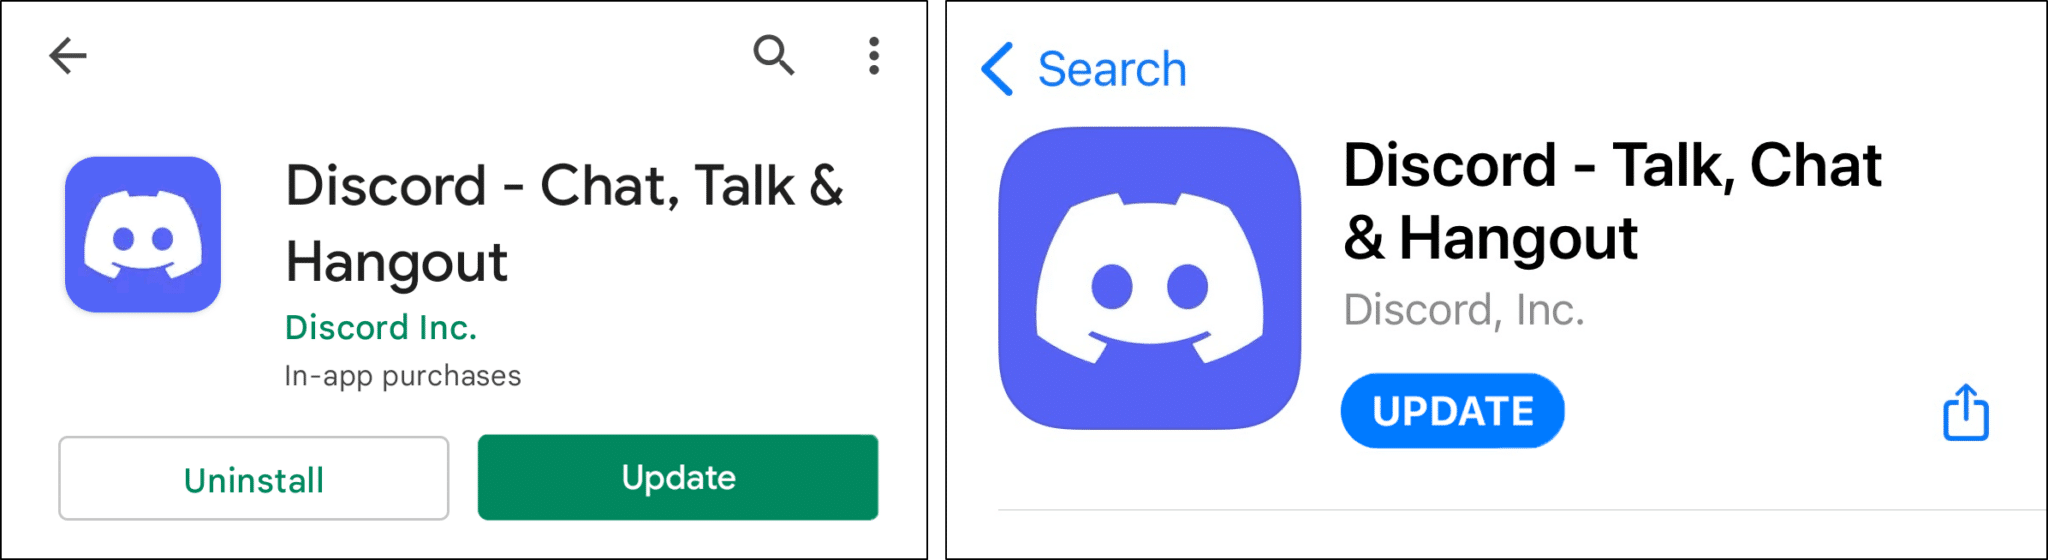 update Discord app on Android and iOS to fix Discord search bar or function not working or showing no results